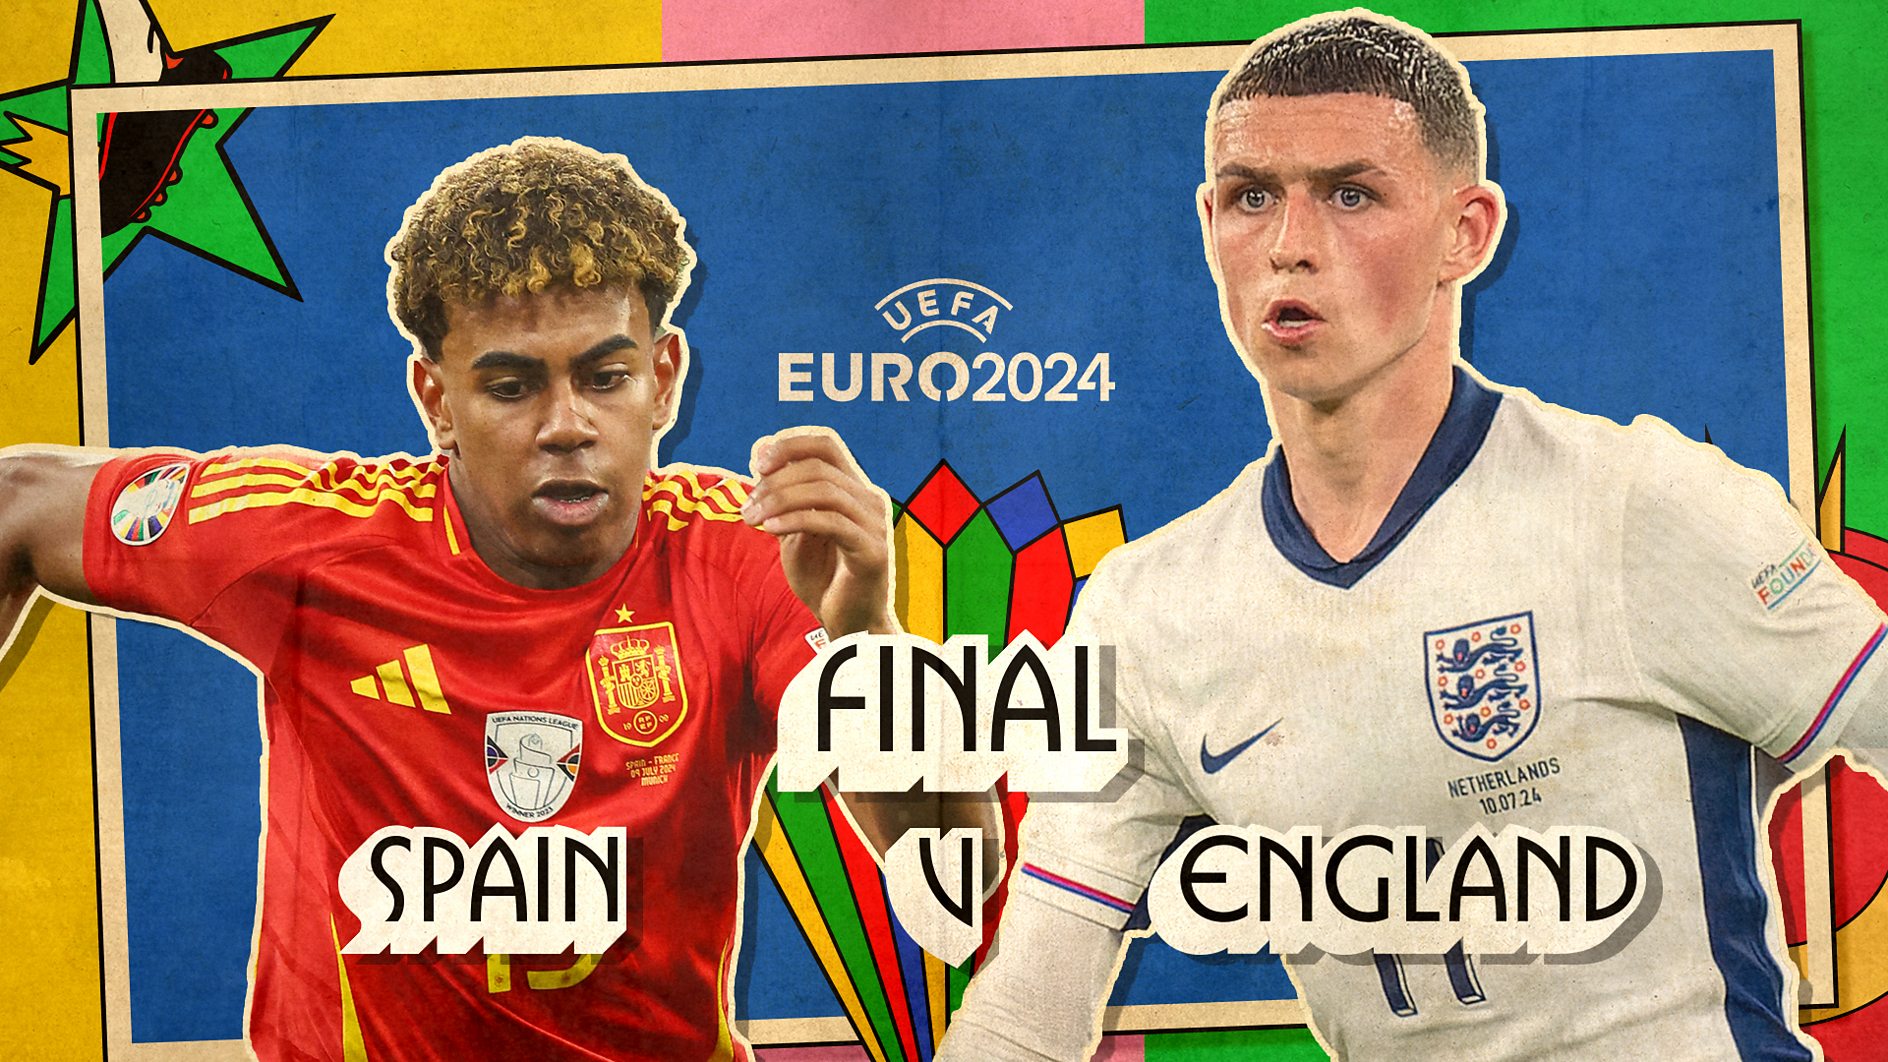 UEFA Euro 2024 Spain v England - How to watch the final and follow live on TV, BBC iPlayer, Radio